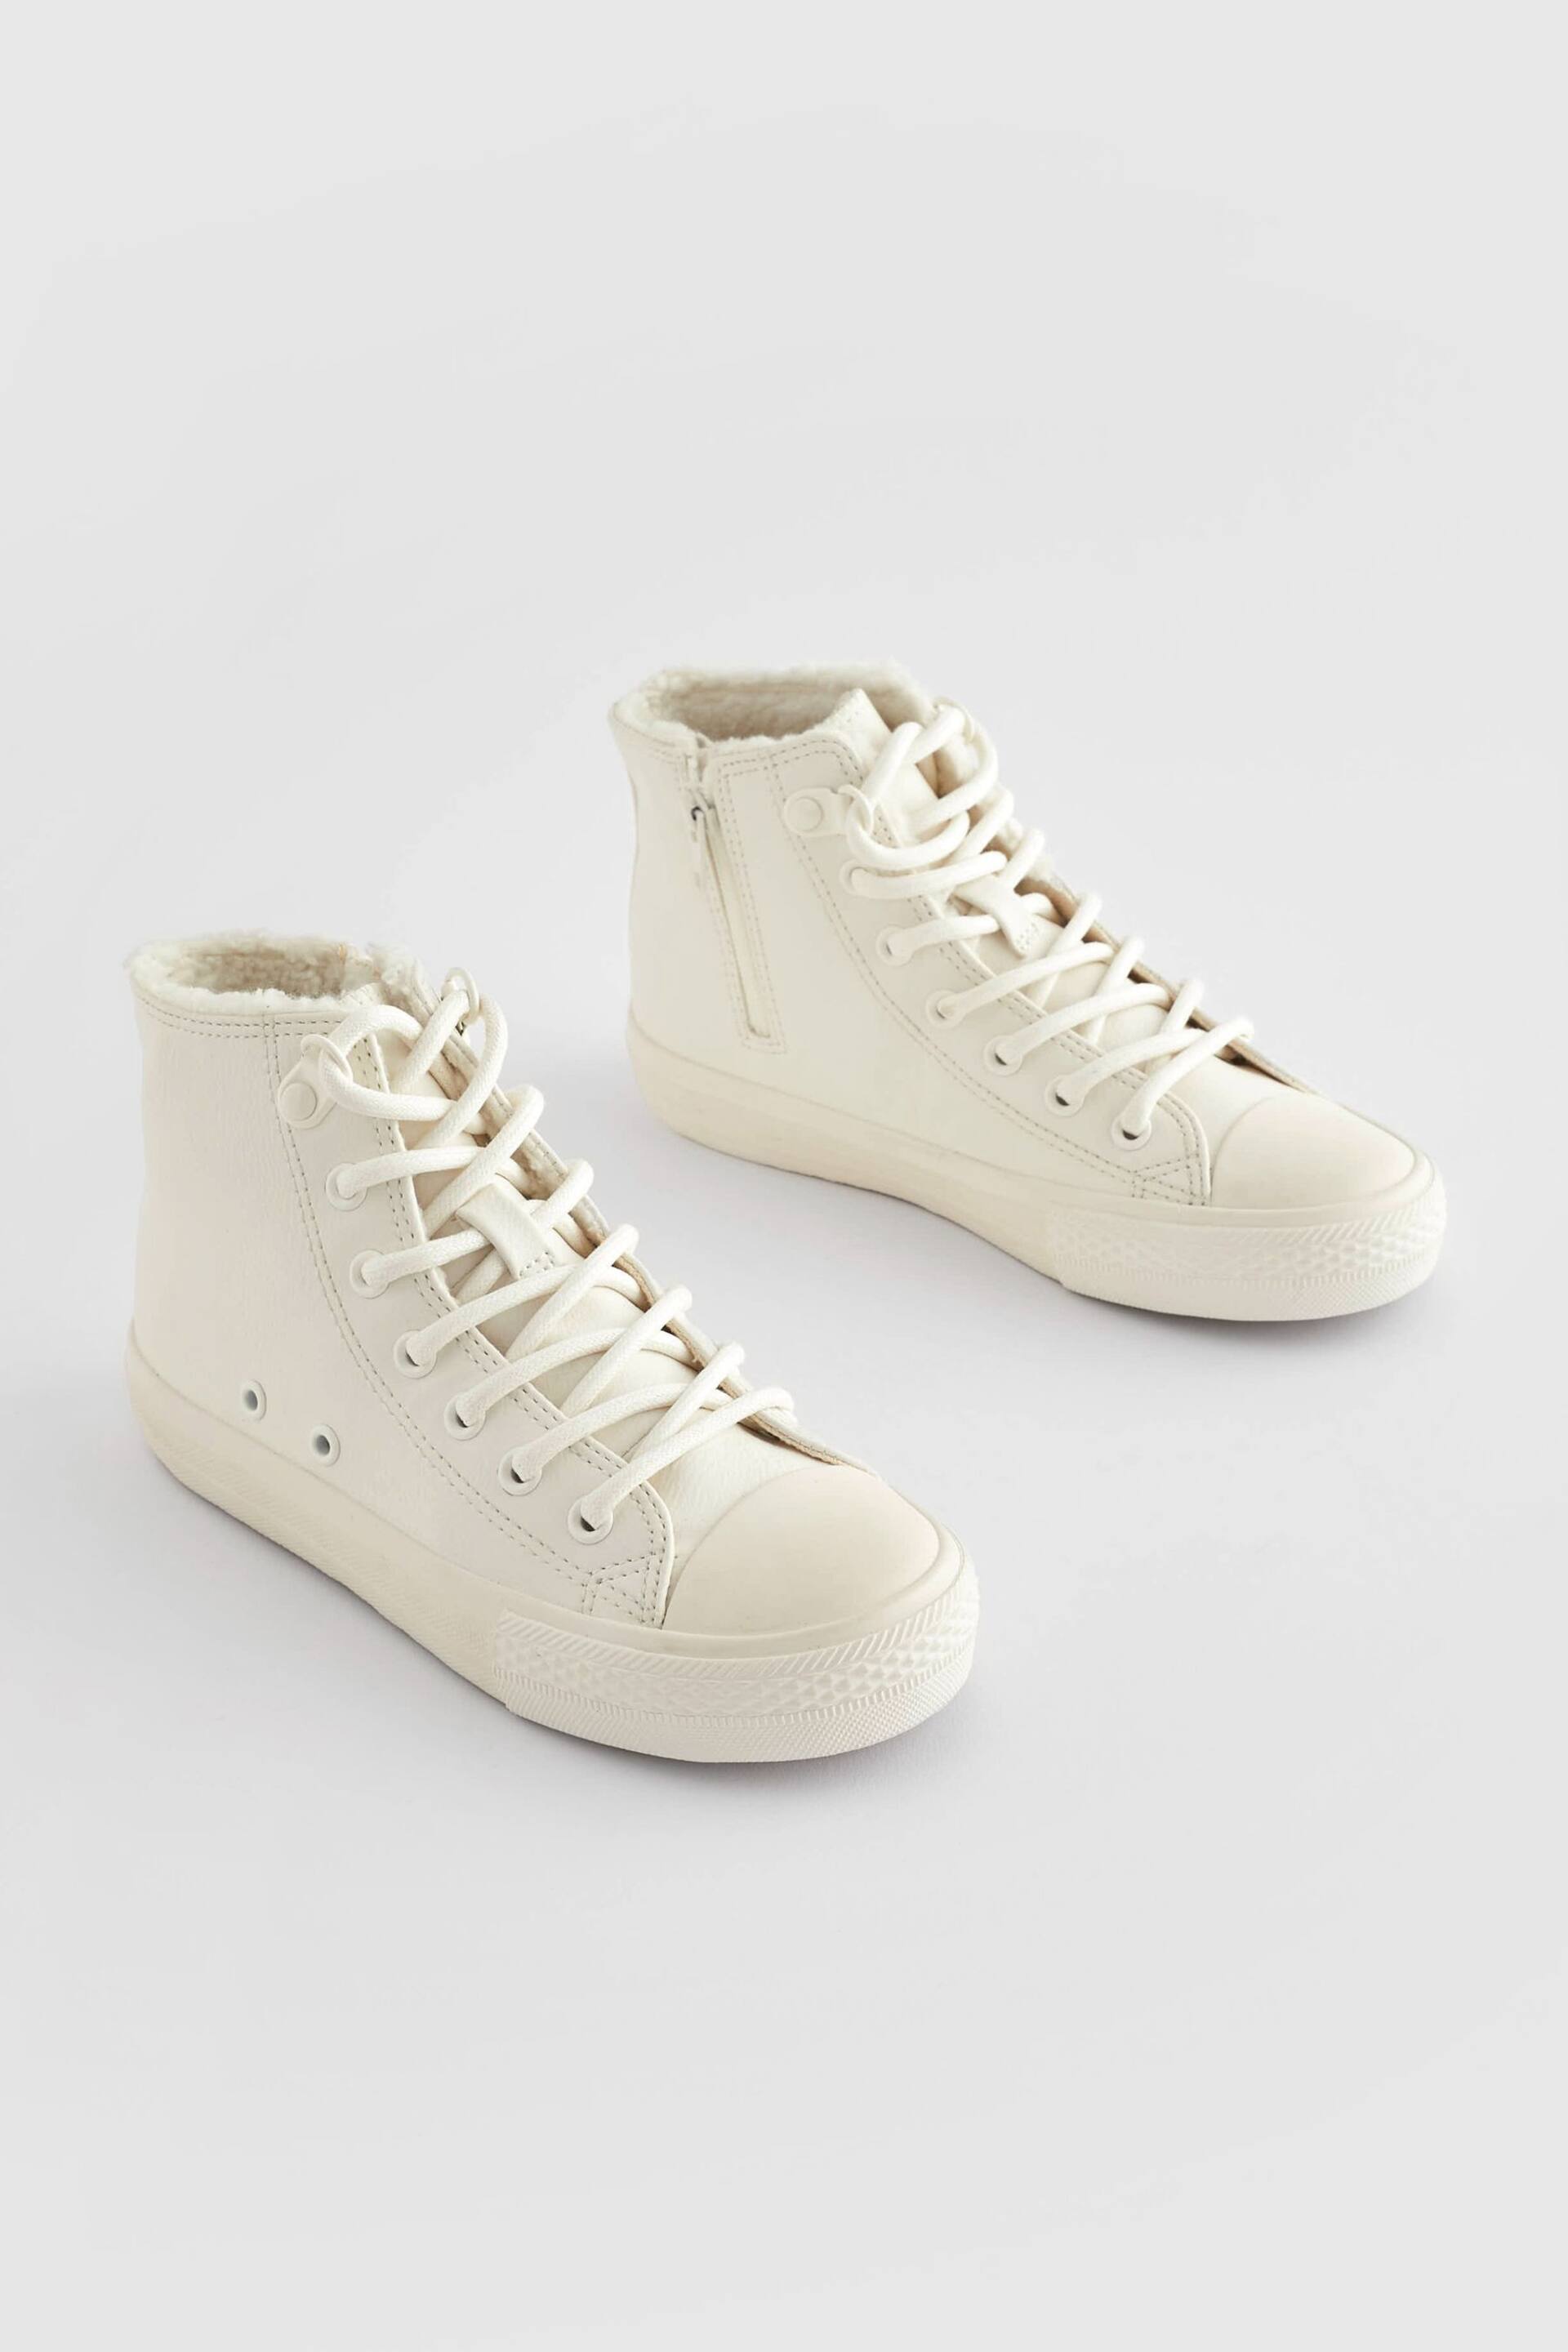 White Faux Fur Lined Standard Fit (F) Lace-Up High Top Trainers - Image 1 of 6